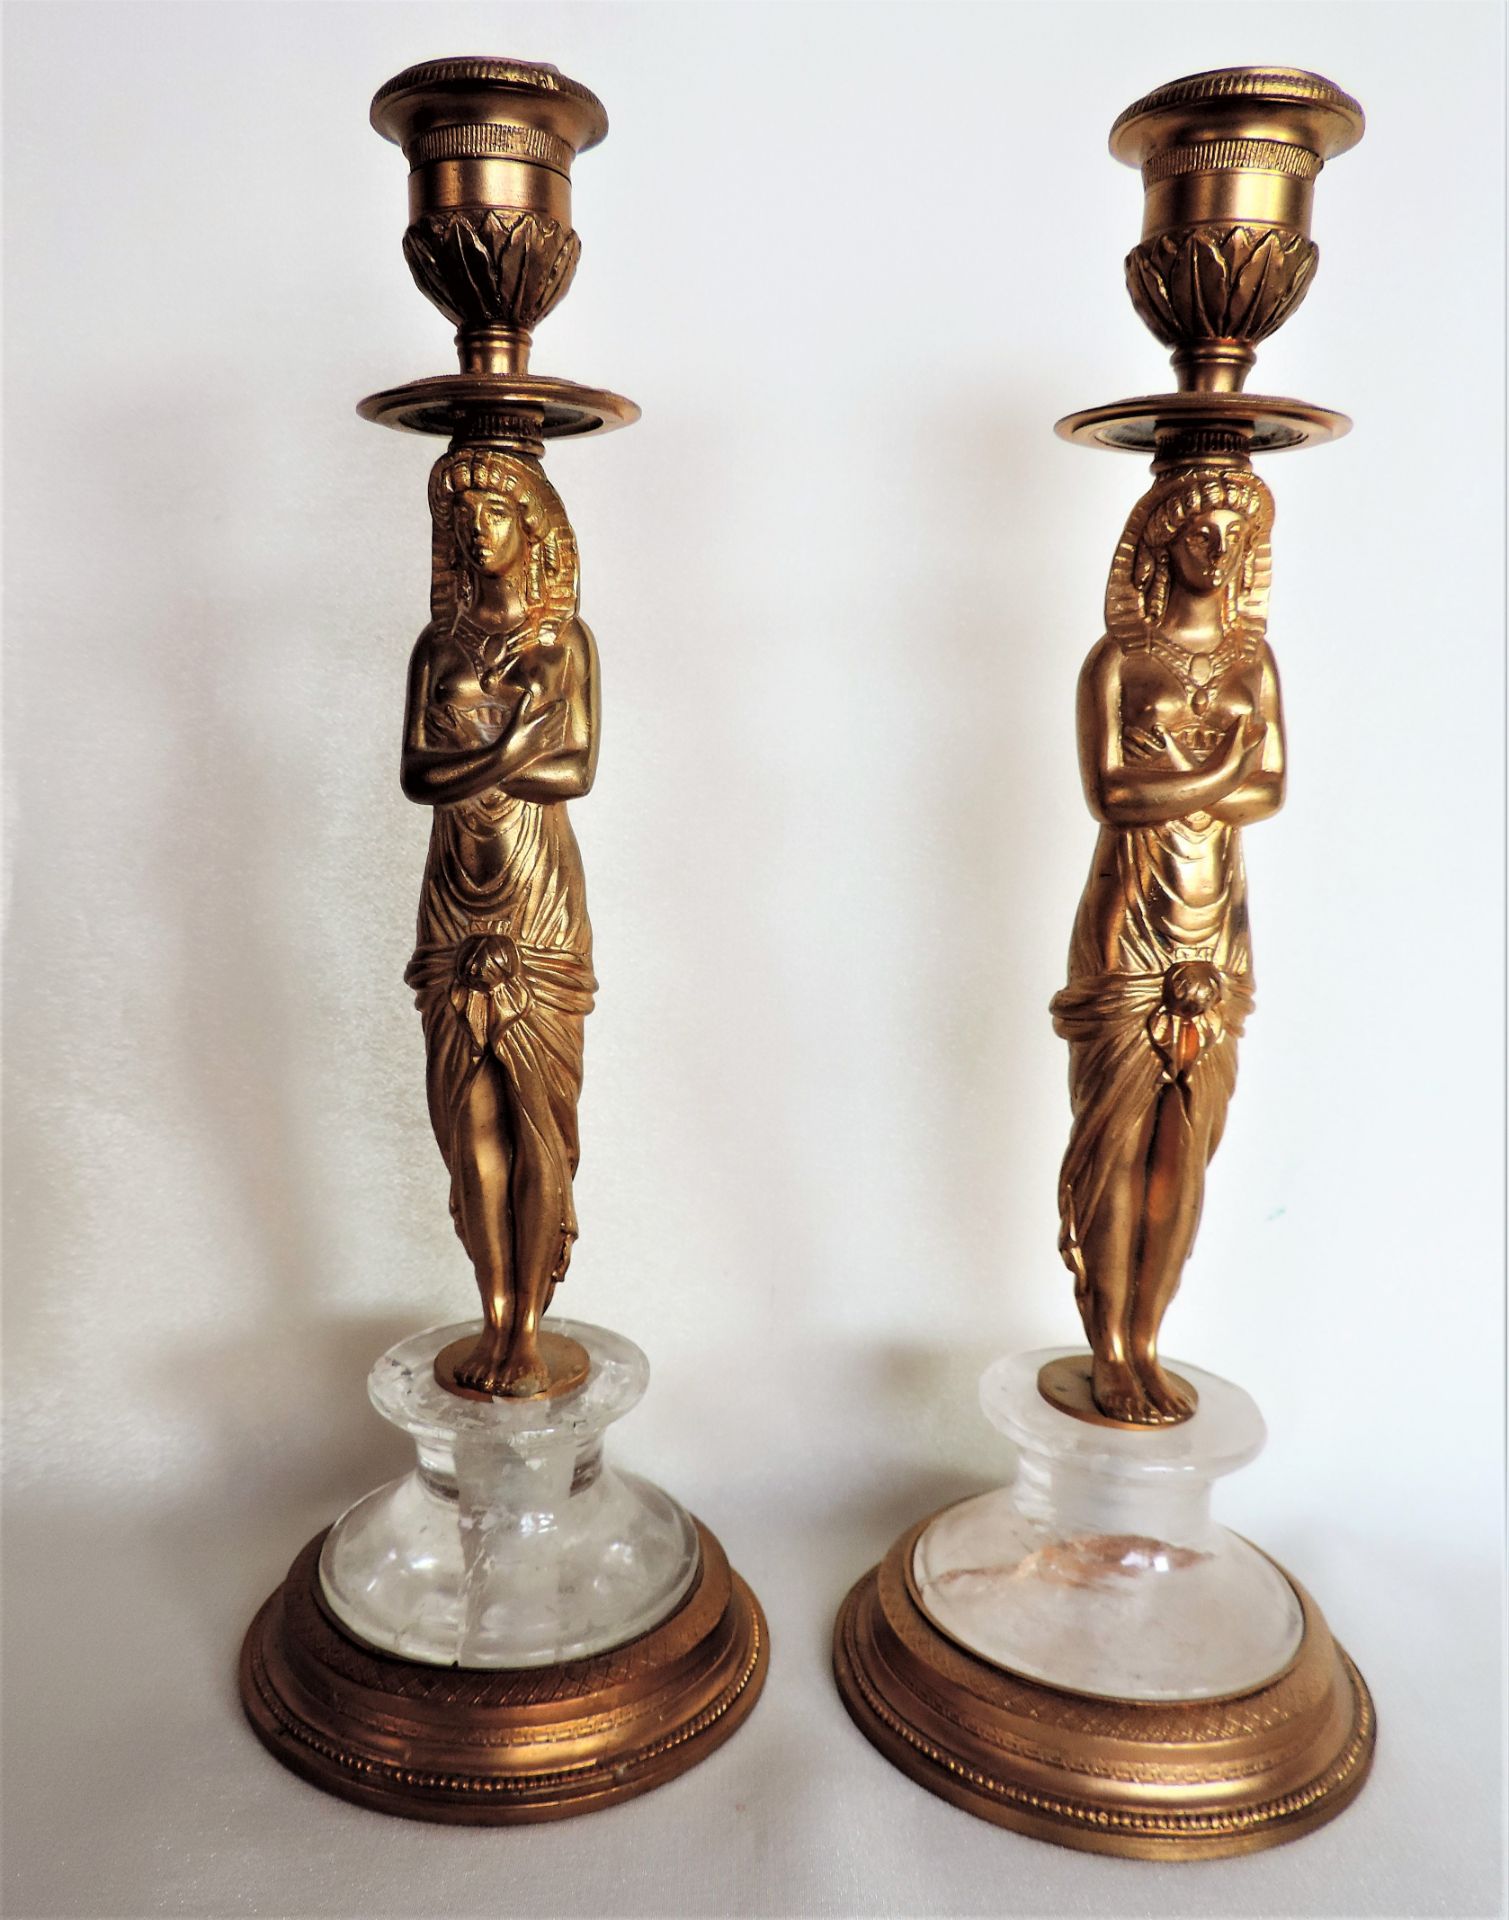 Pair Antique Gilt Egyptian Revival Candlesticks - Image 2 of 6